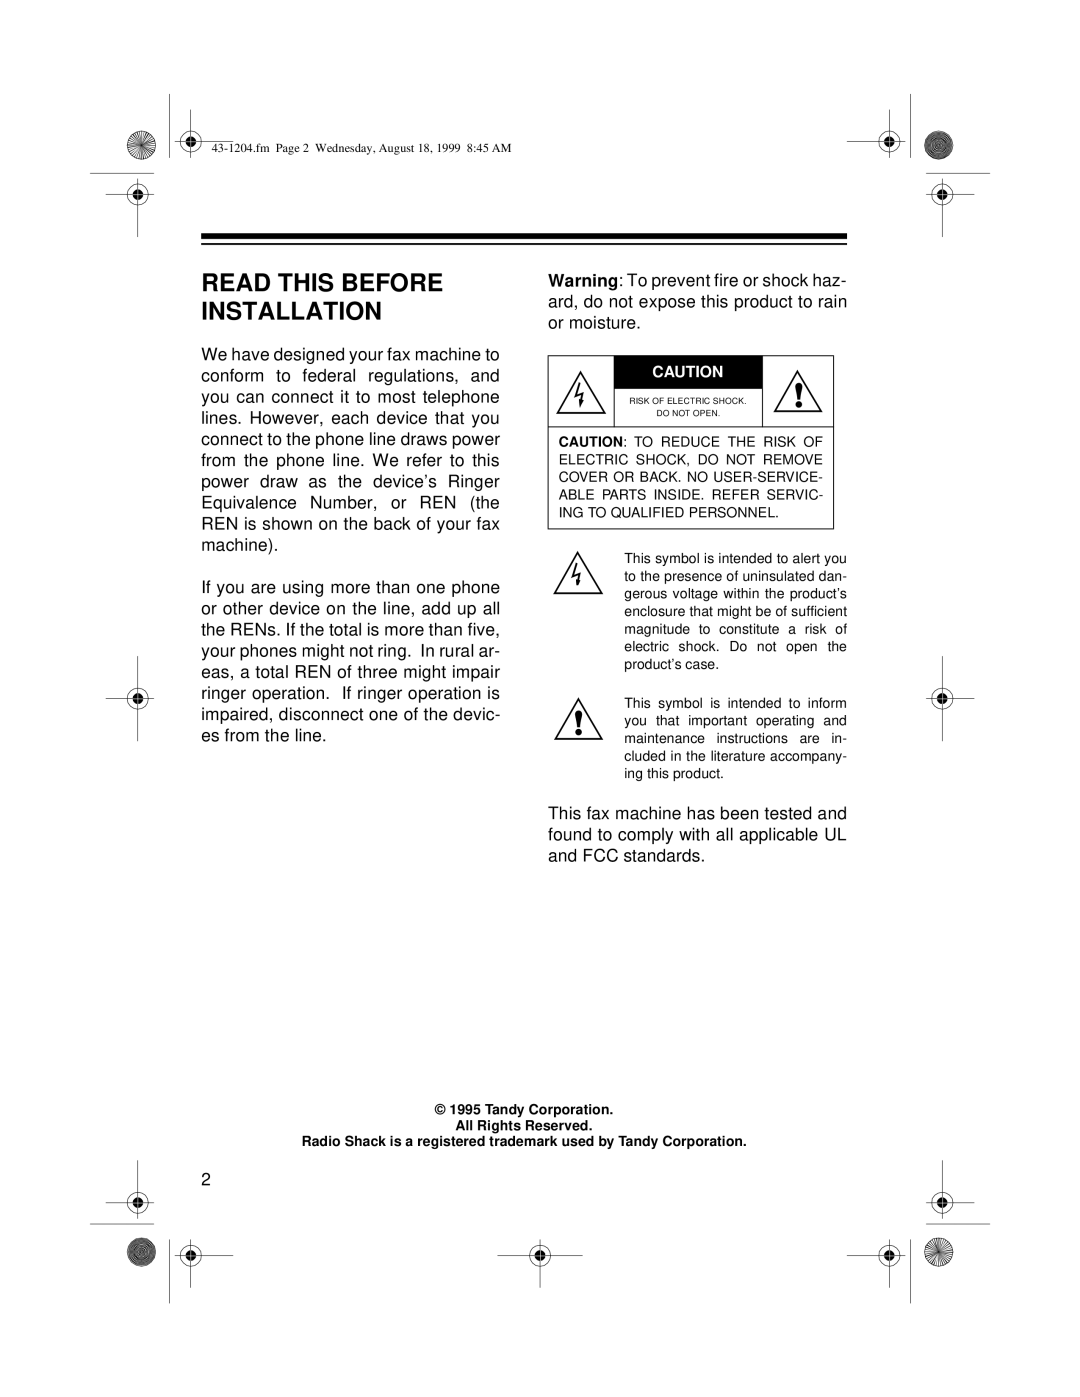 Radio Shack 43-1204 owner manual Read This Before Installation, Tandy Corporation All Rights Reserved 